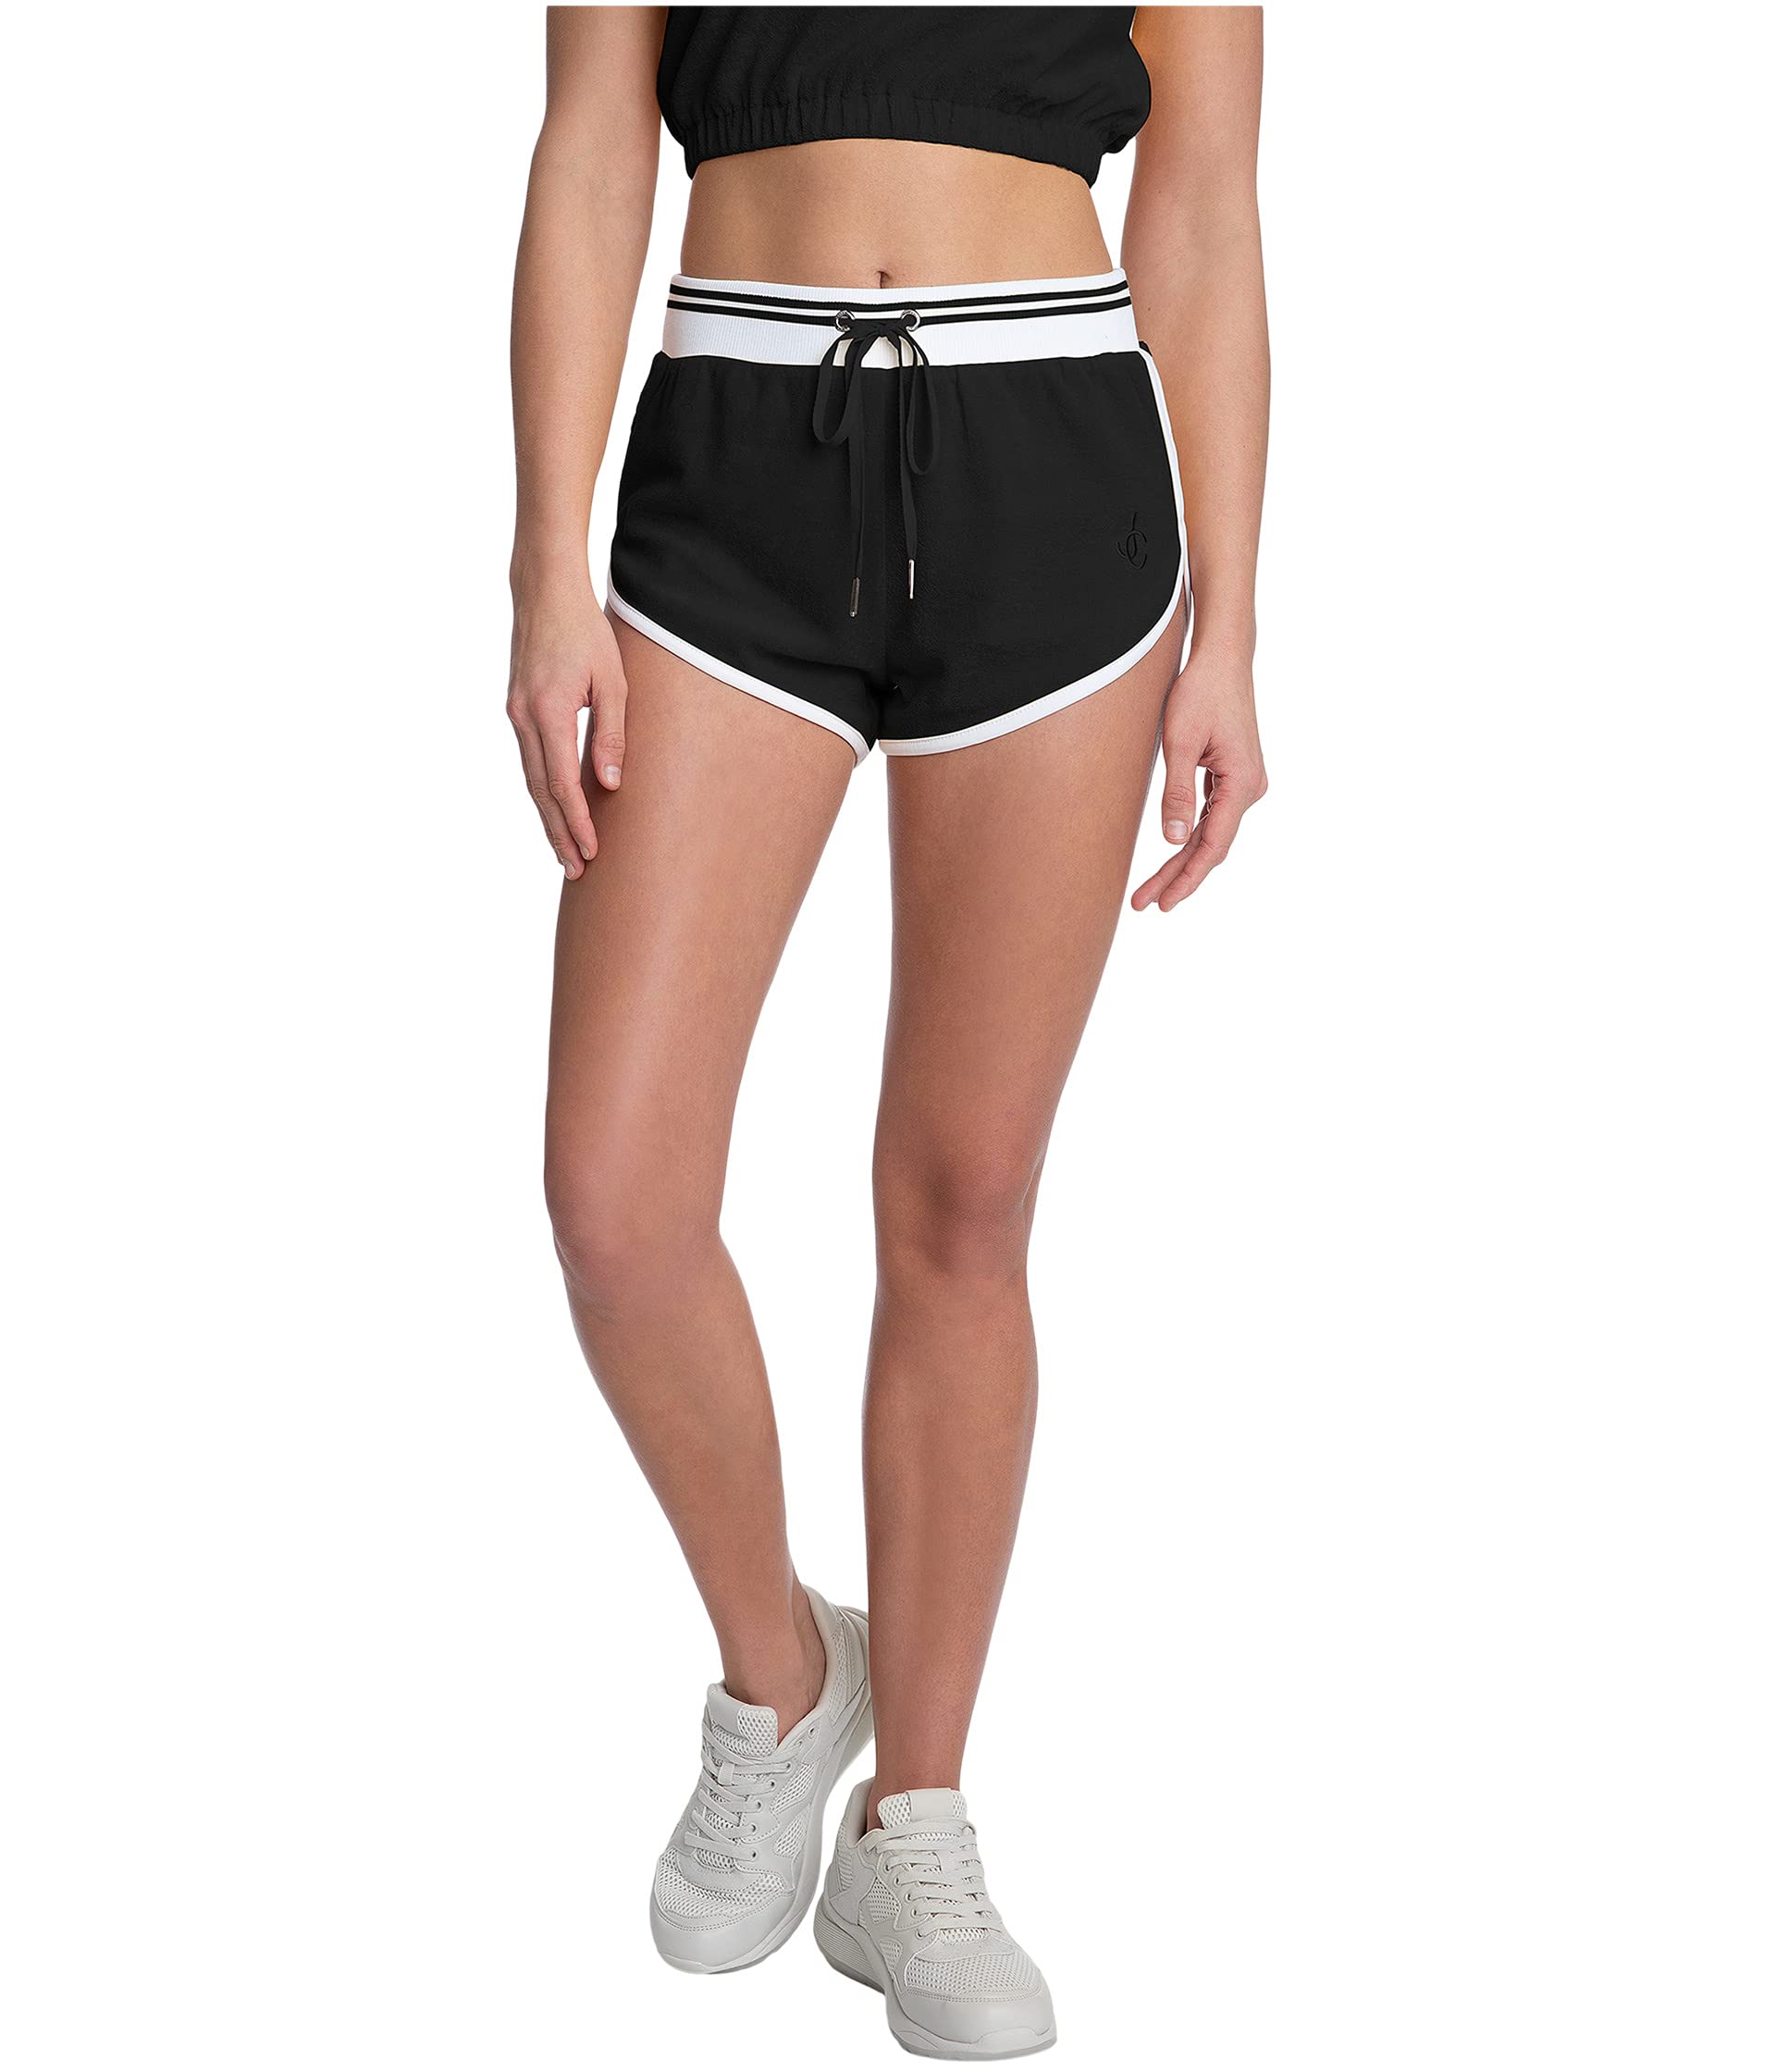 шорты juicy couture paperbag shorts Шорты Juicy Couture, Shorts with Piping